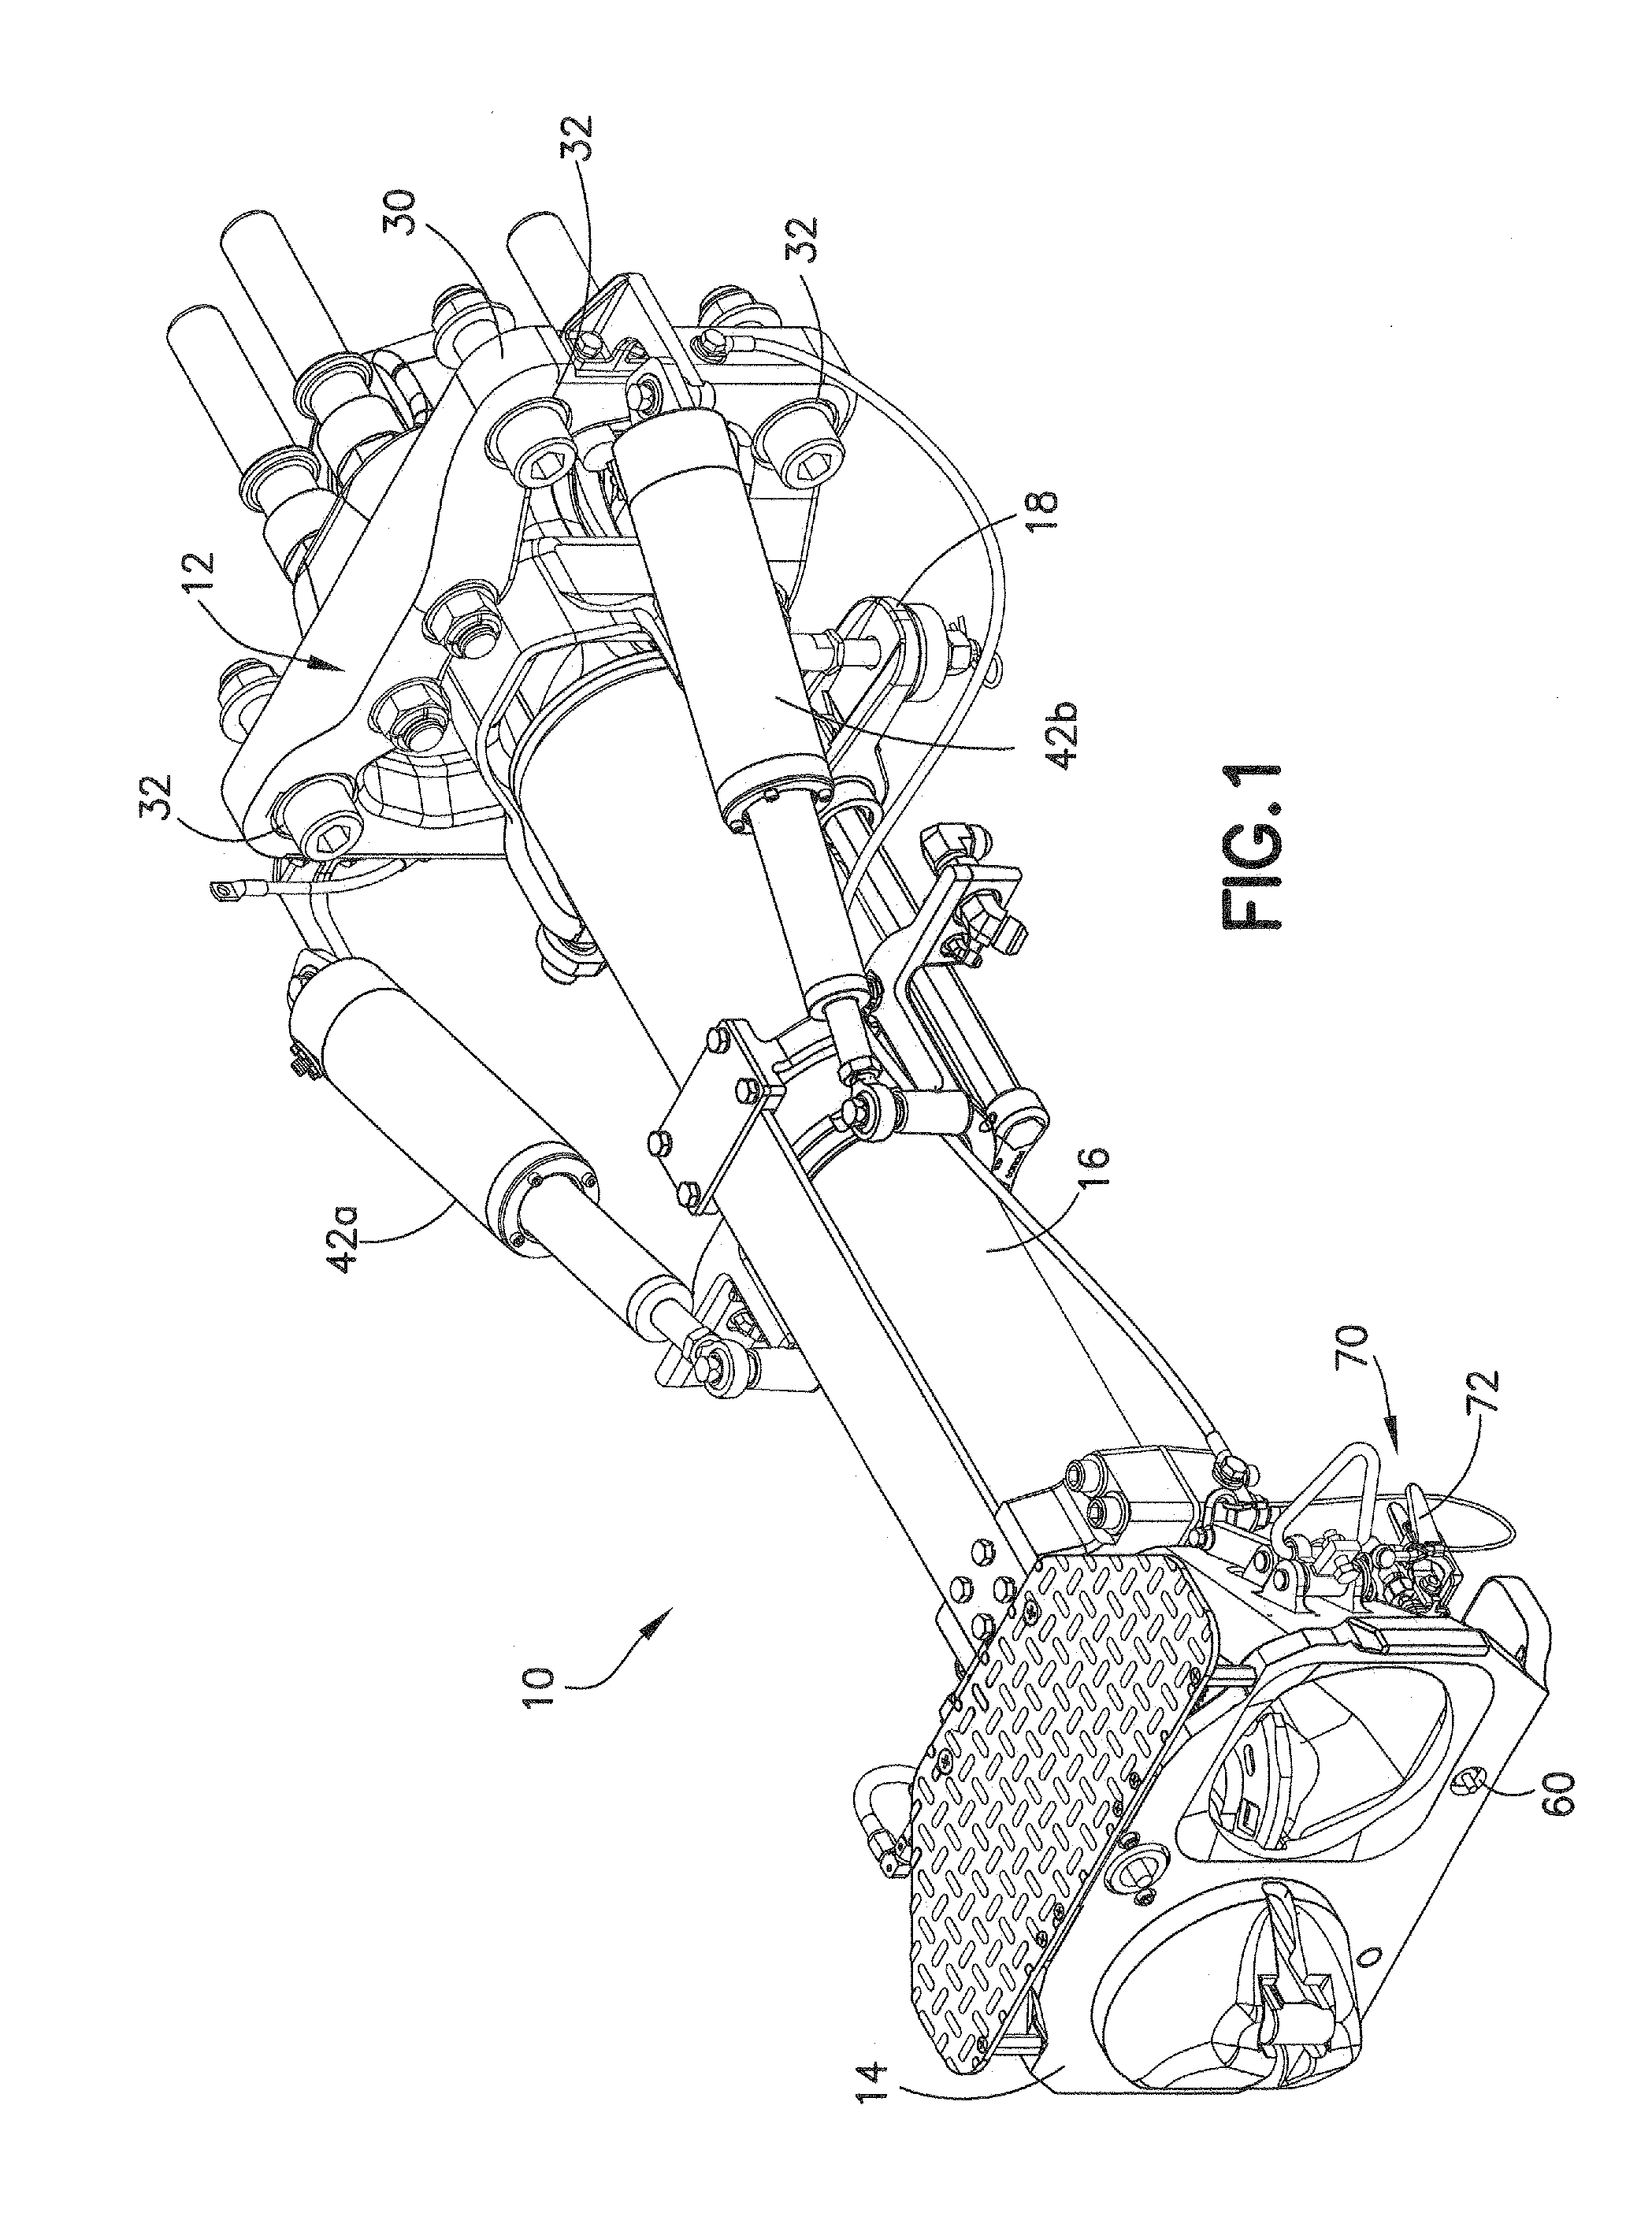 Automated Coupler Positioning Device